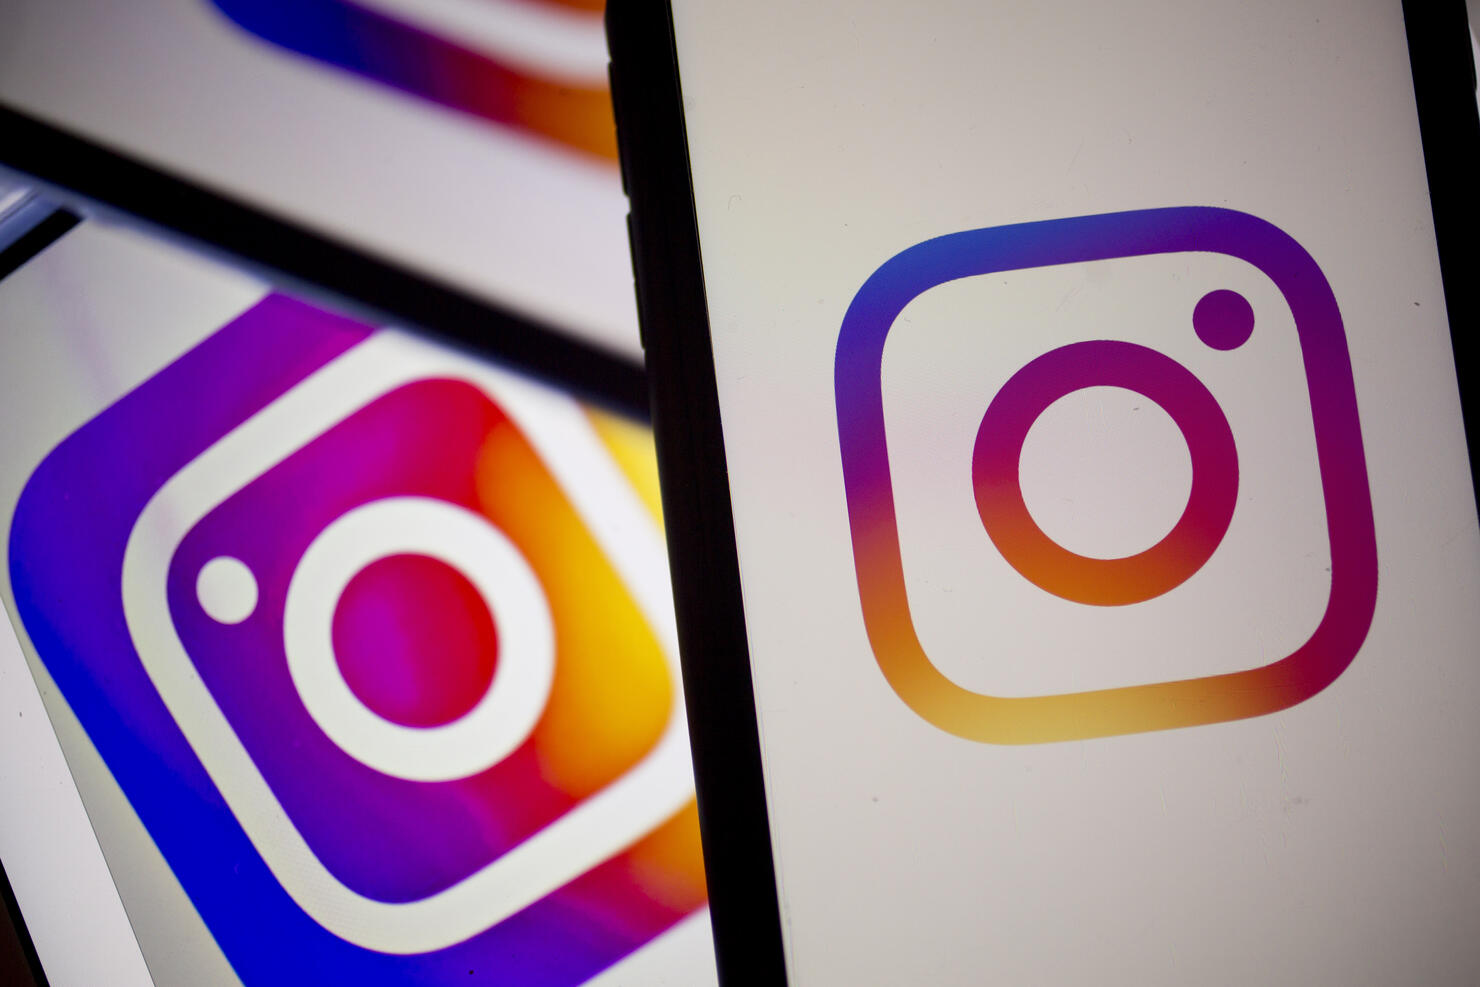 Instagram Illustrations As Facebook Shares Surge On Sales Growth